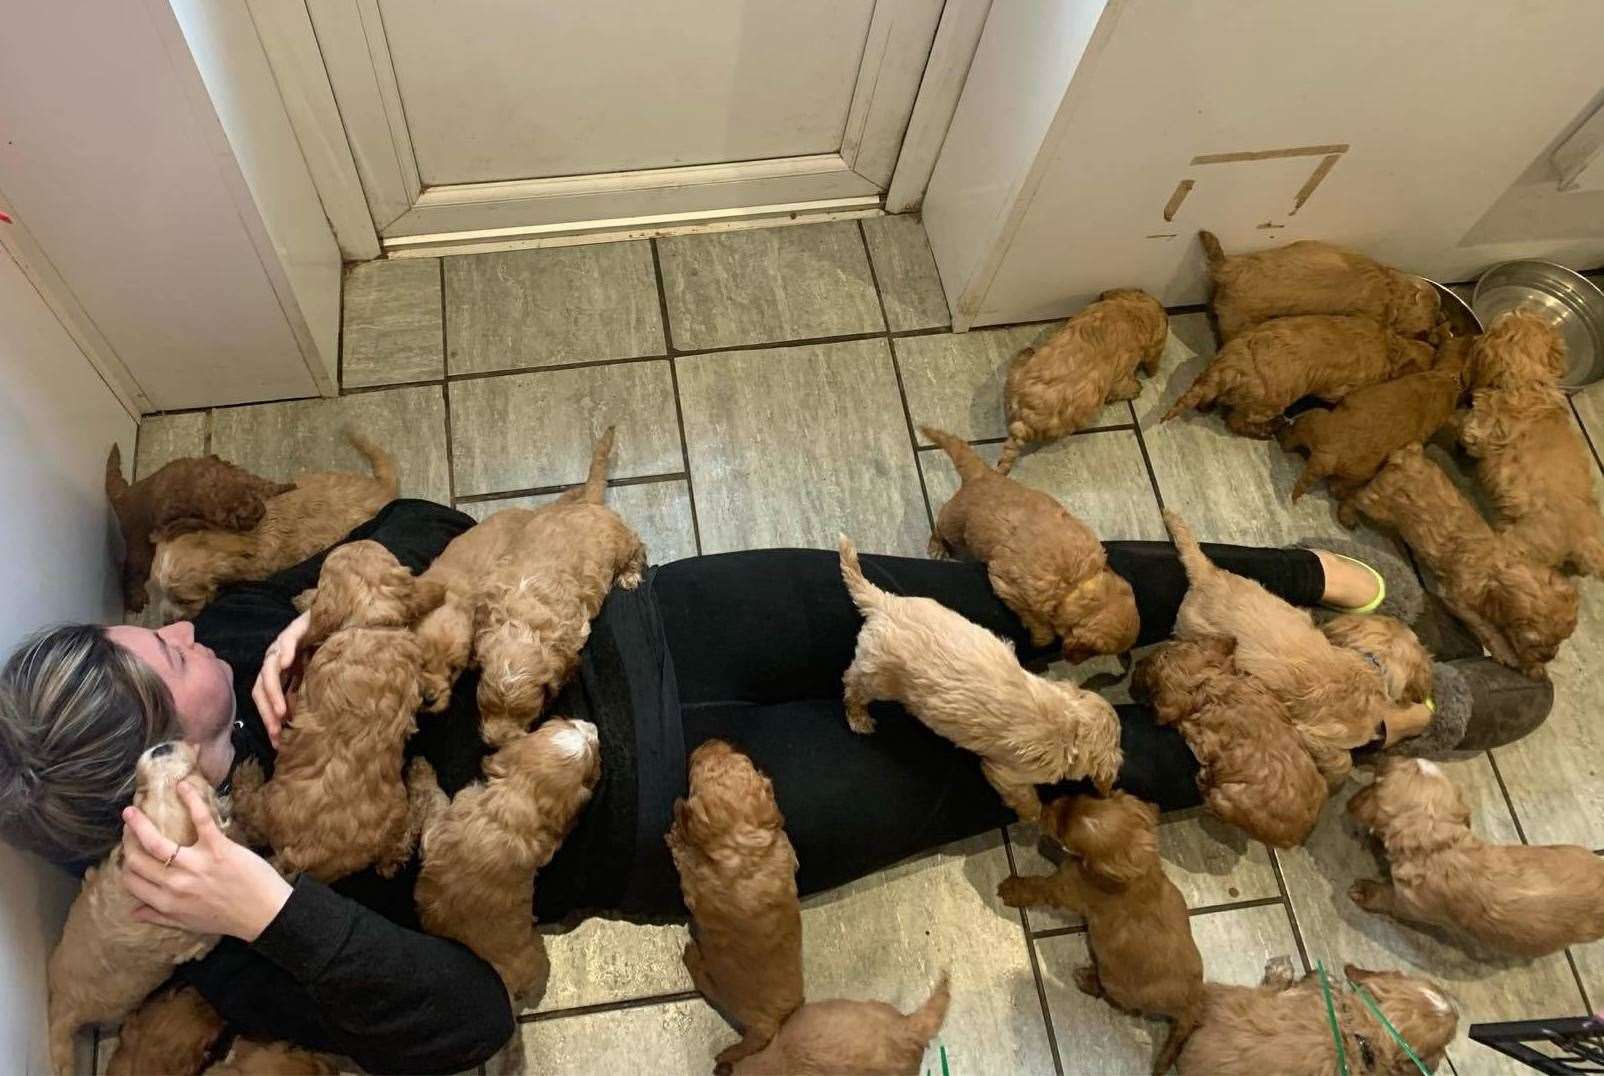 Amii Thatcher says the puppies are helping her family get through isolation